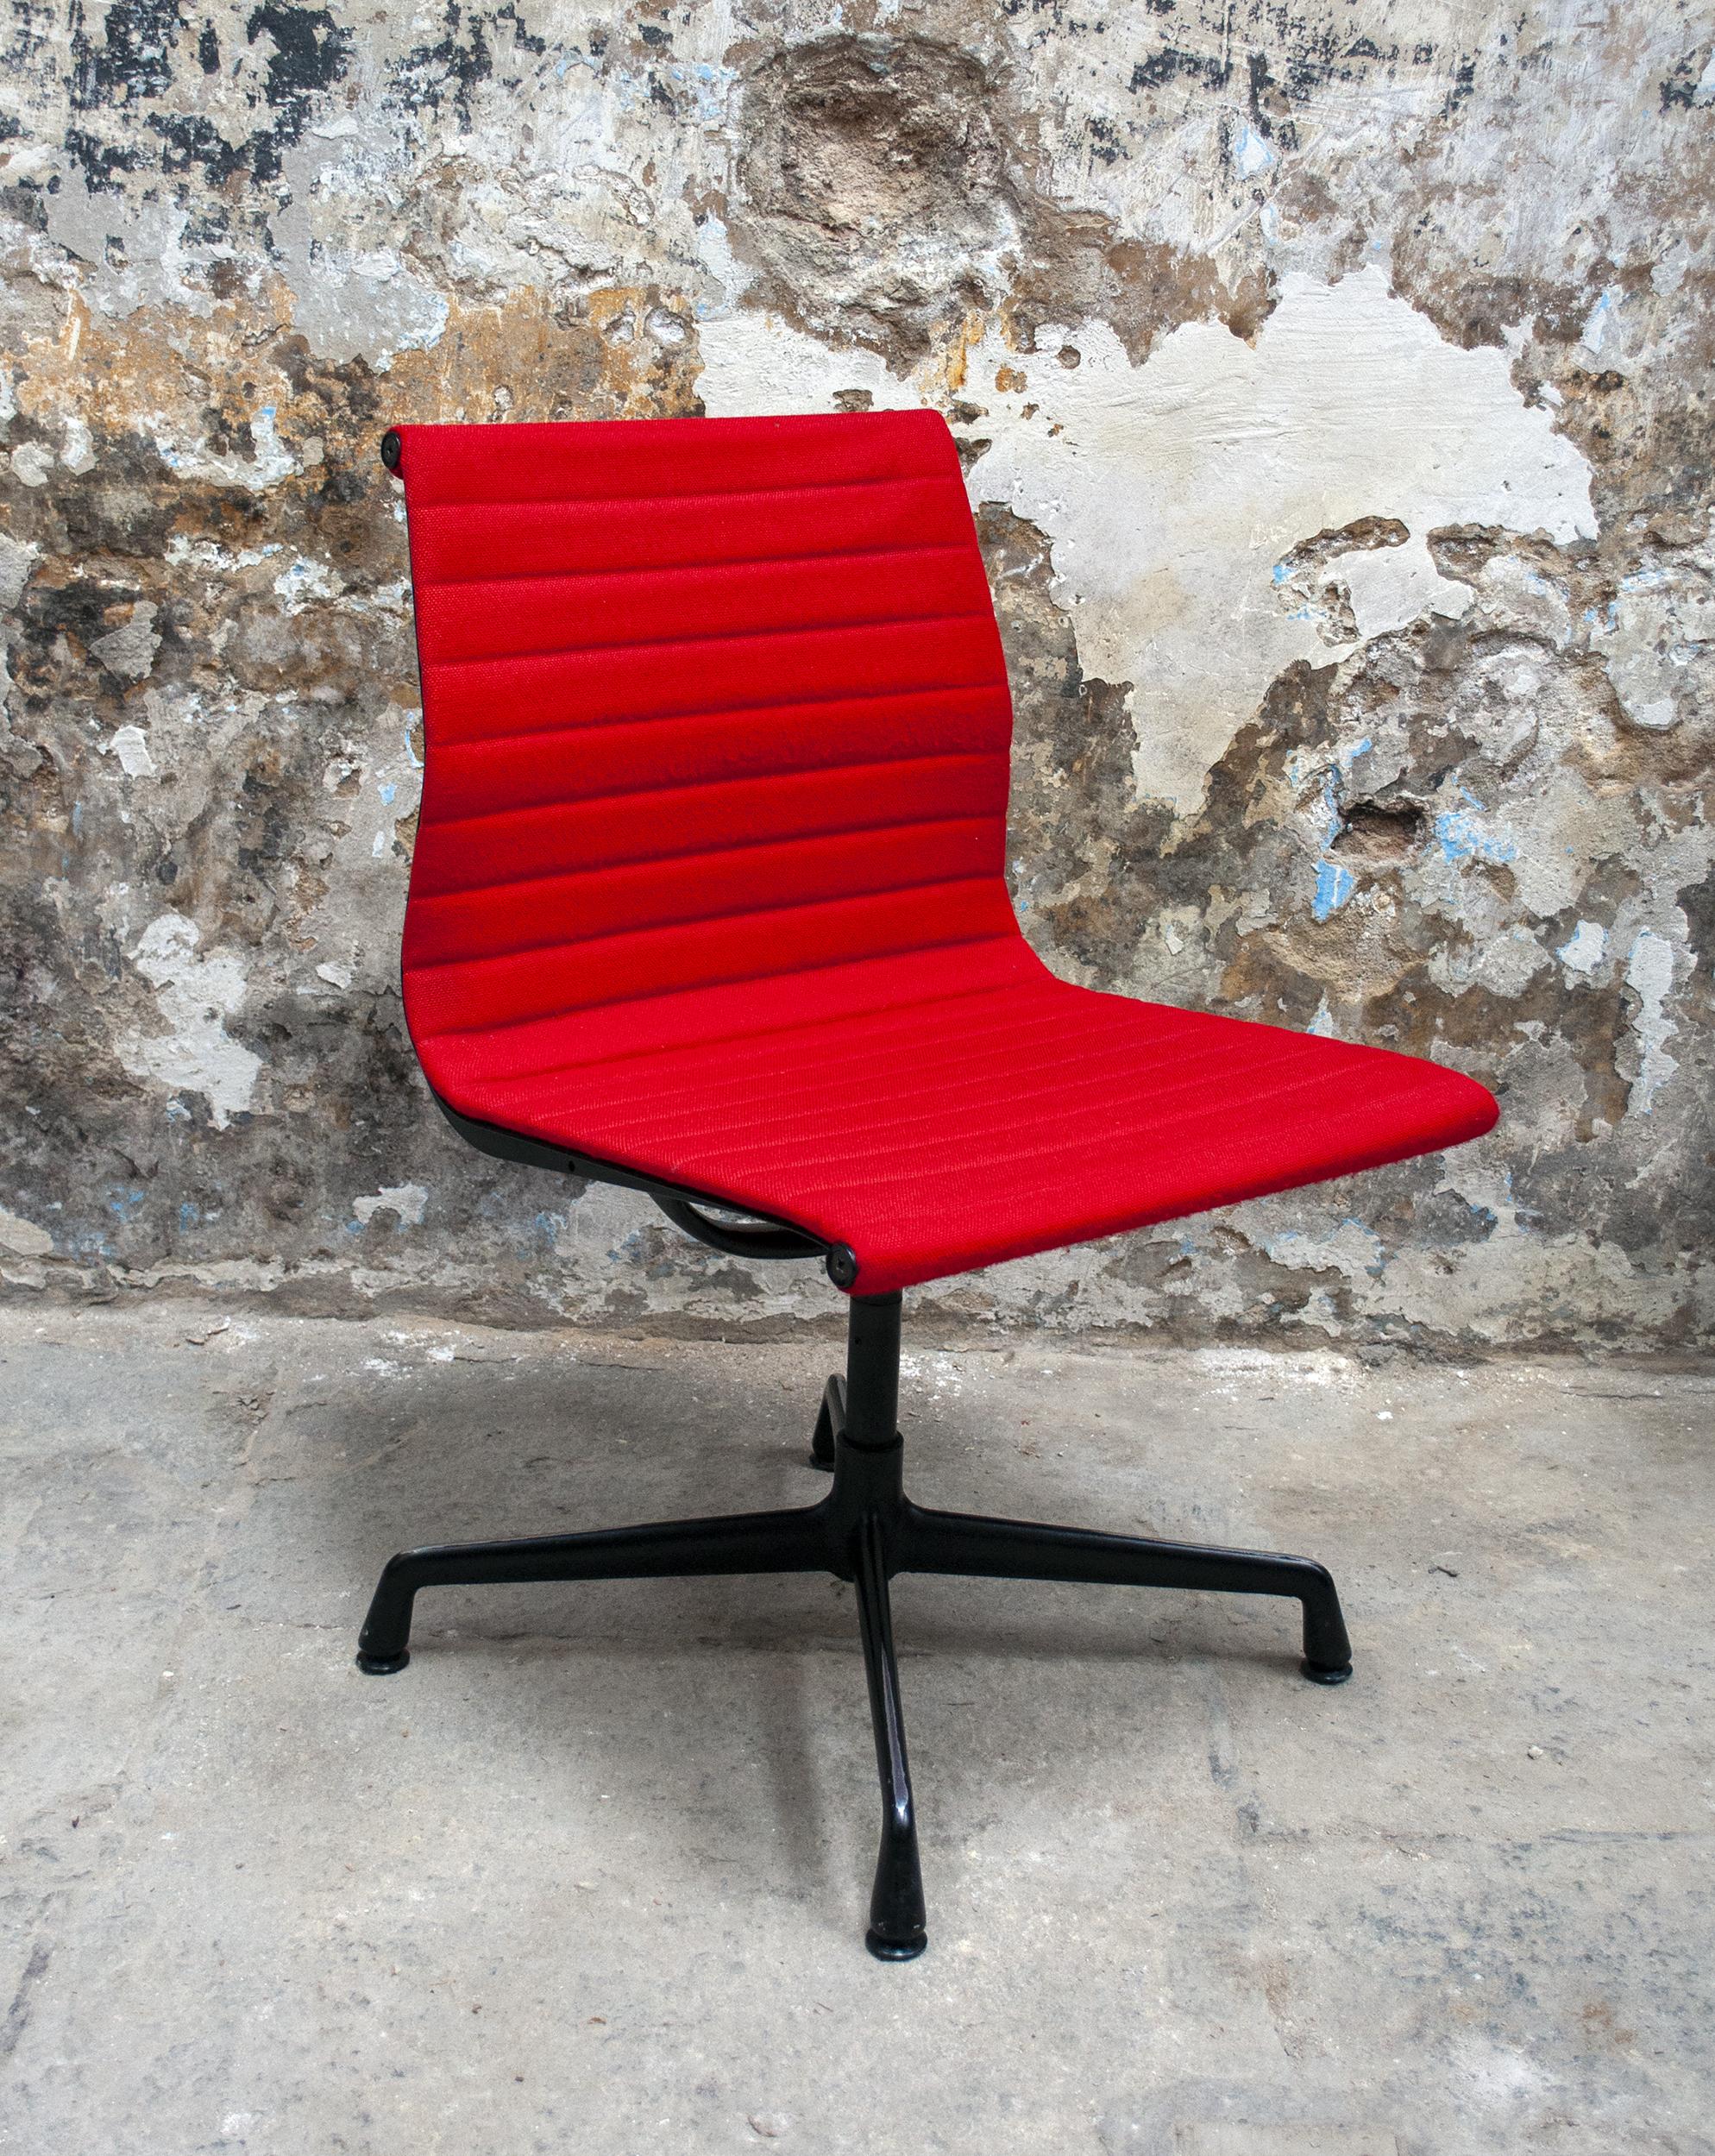 Pair of swivel office chairs with aluminum frame and fabric seat.
Aluminum chair model
Designer Charles & Ray Eames
ICF manufacturer for Herman Miller
1980s.